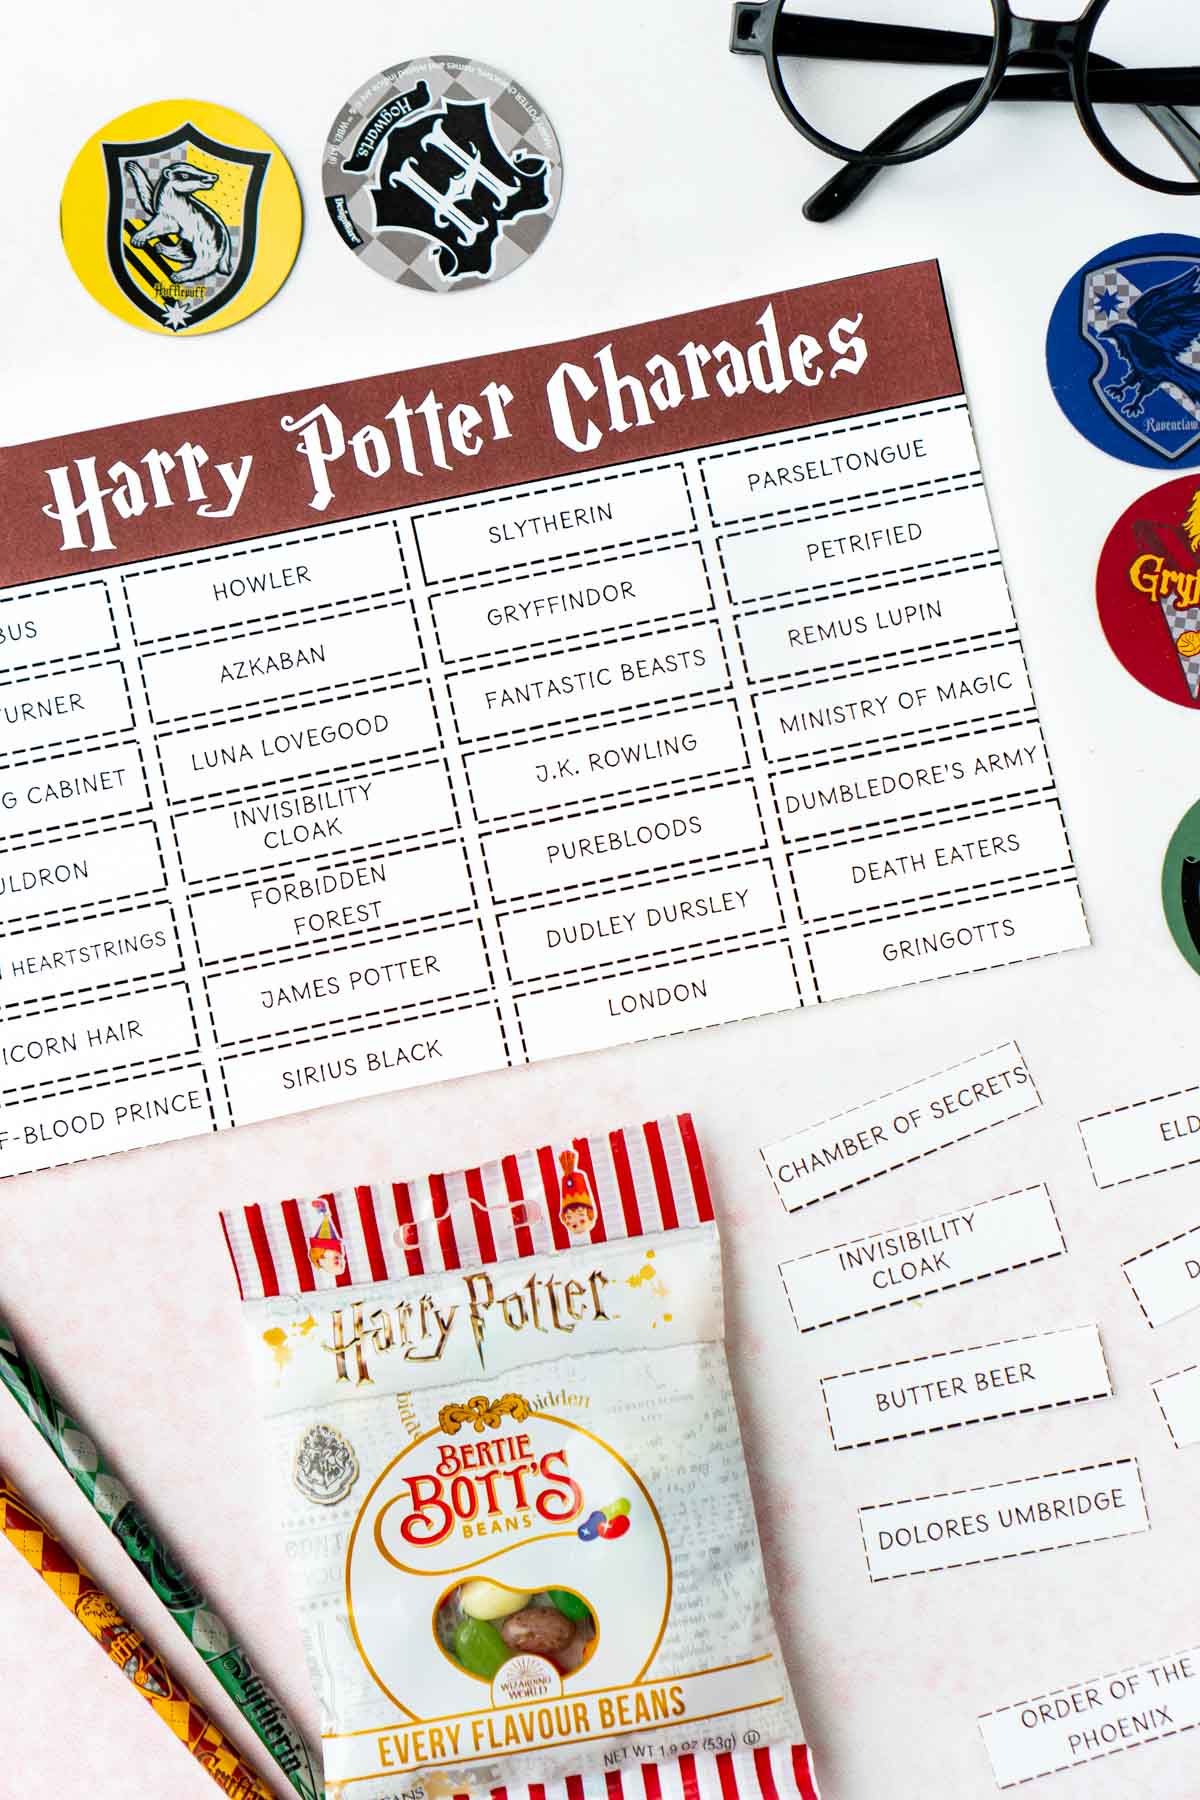 Harry Potter Charades Words  Free Printable   - 18